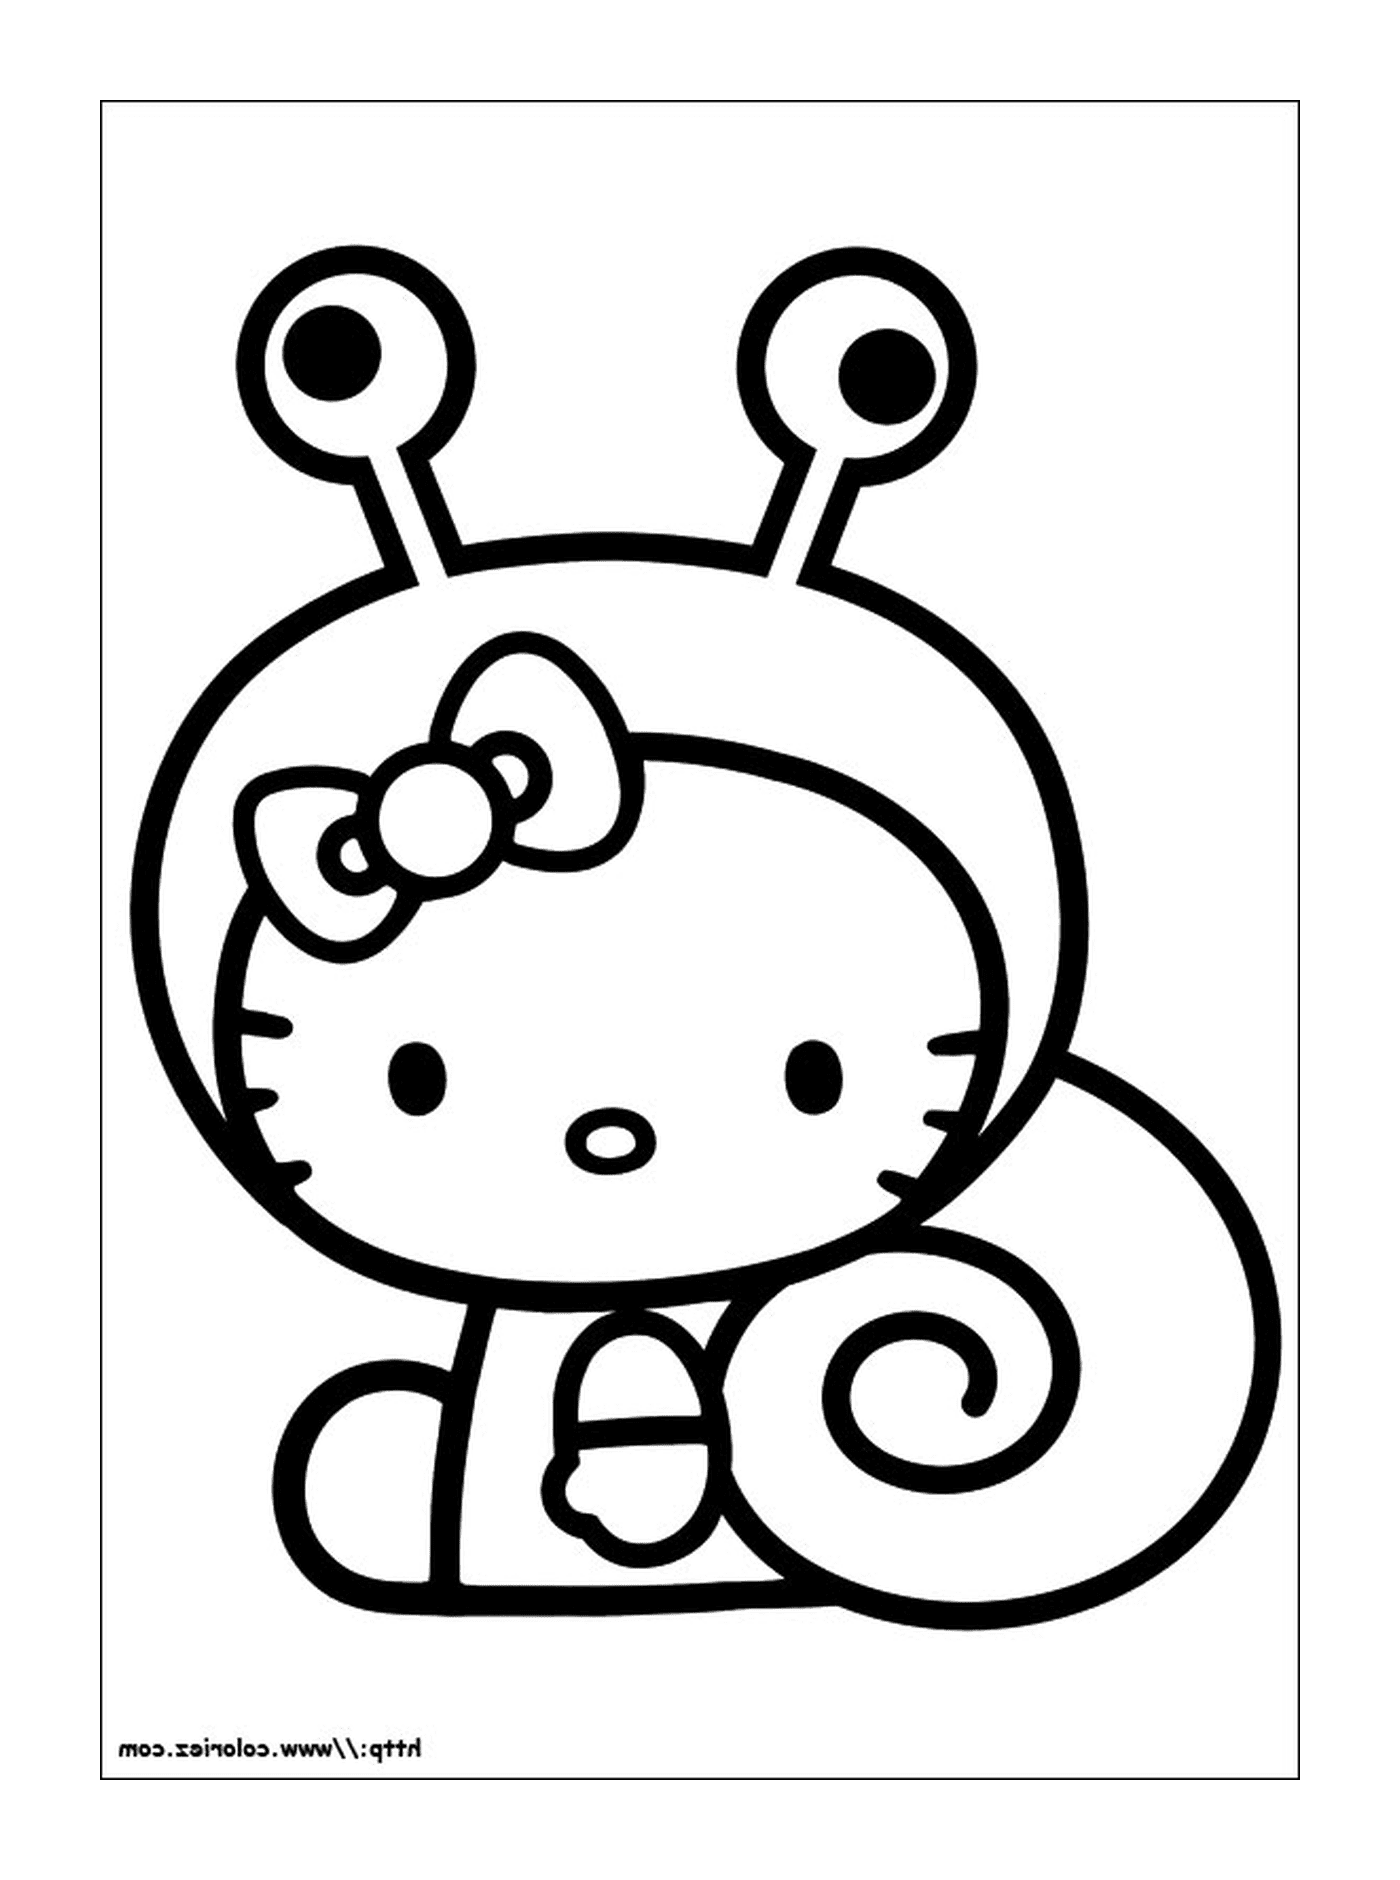  Hello Kitty with a snail on her head 